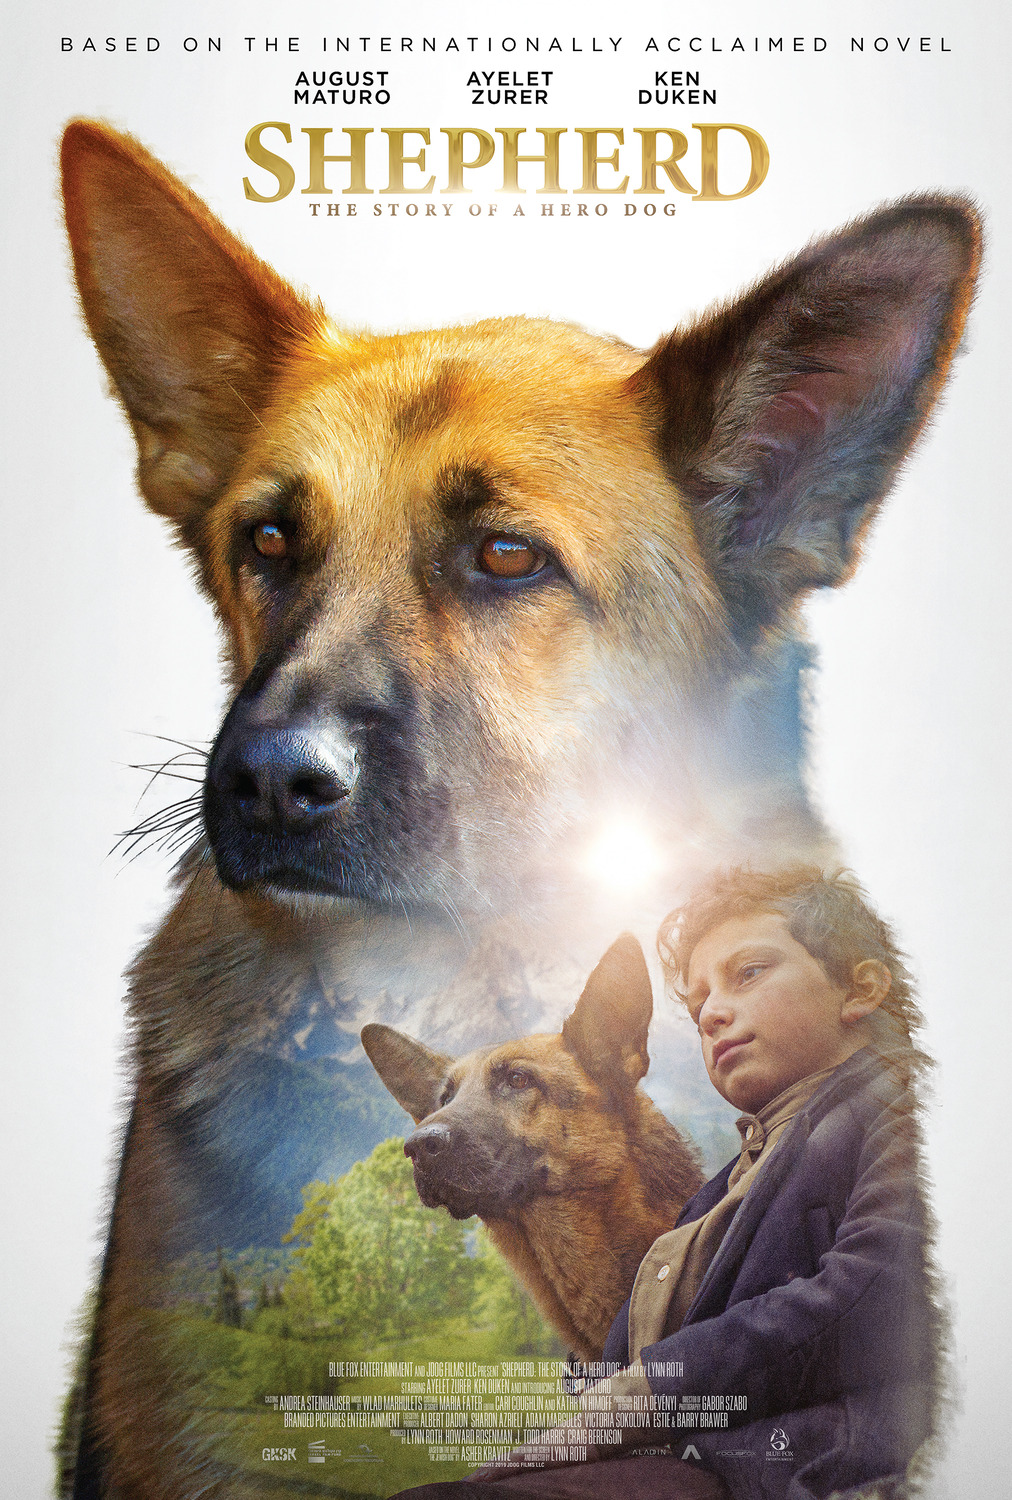 Extra Large Movie Poster Image for SHEPHERD: The Story of a Jewish Dog (#2 of 2)